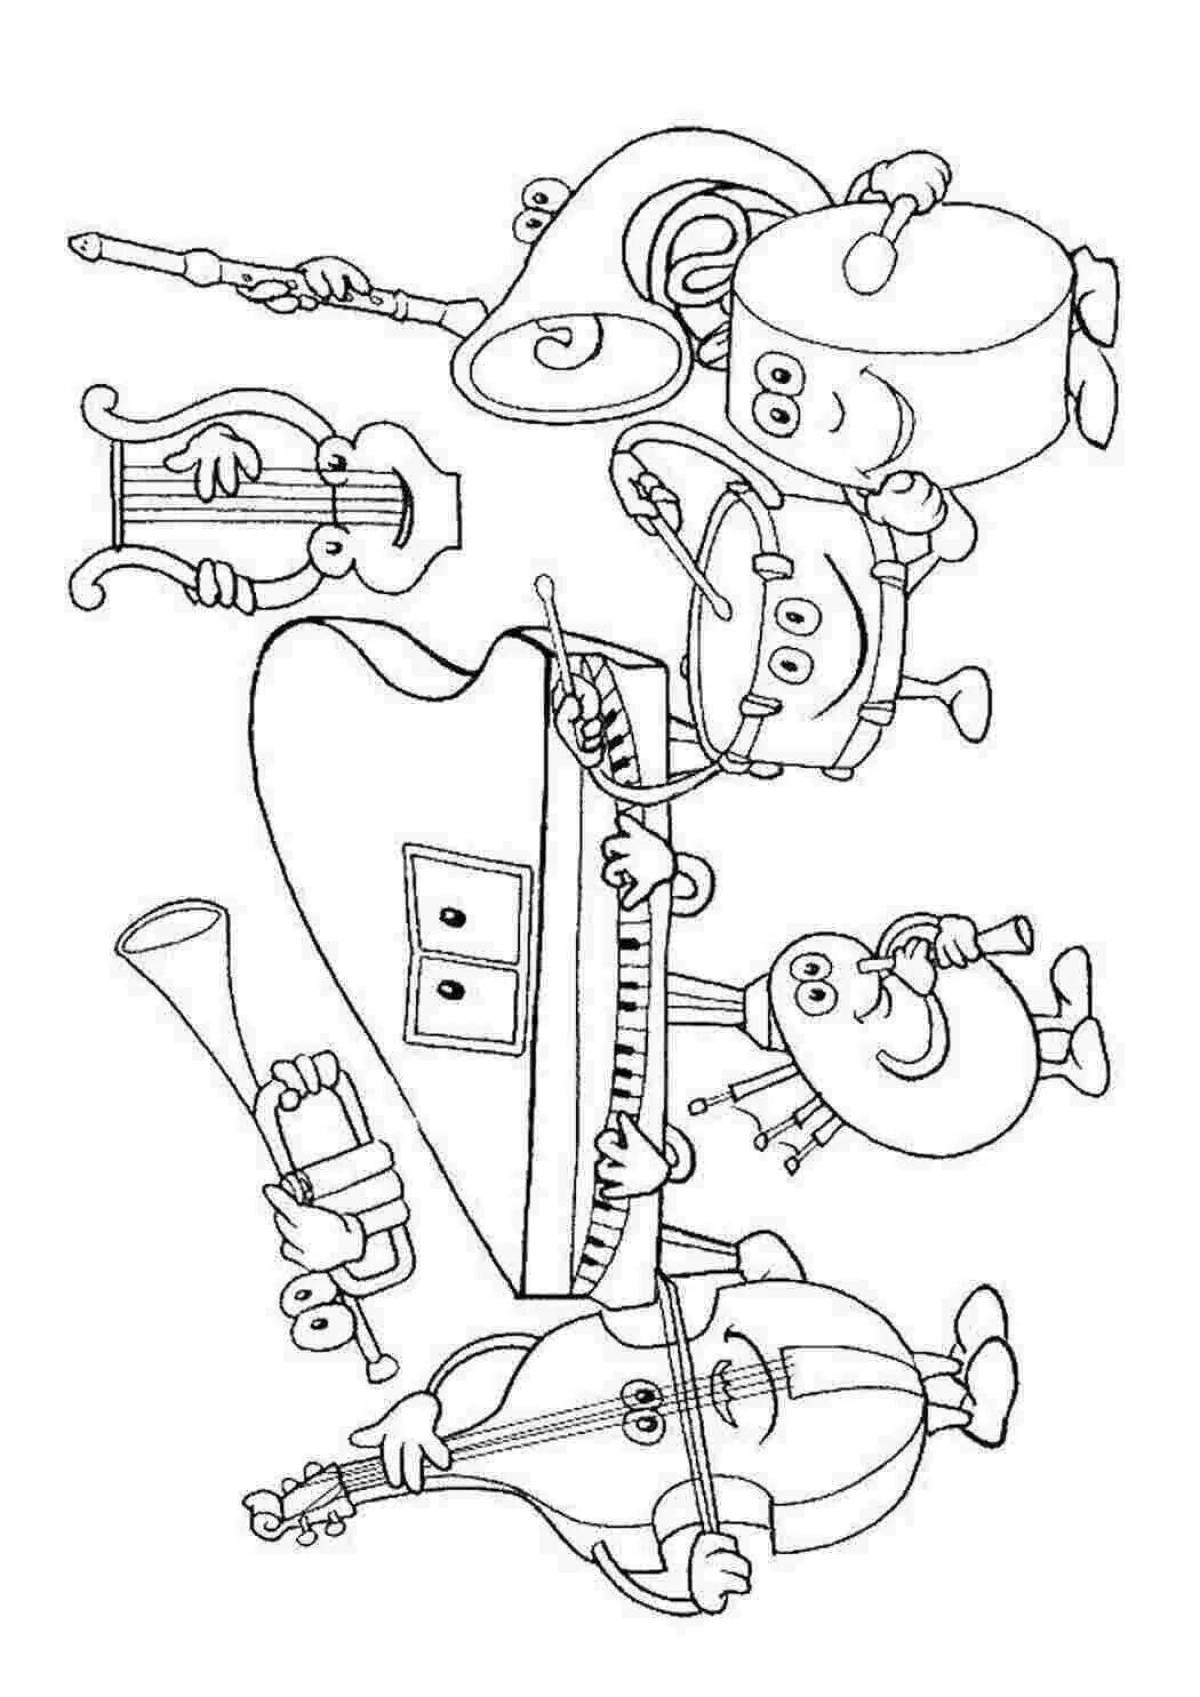 Exciting music grade 1 coloring picture